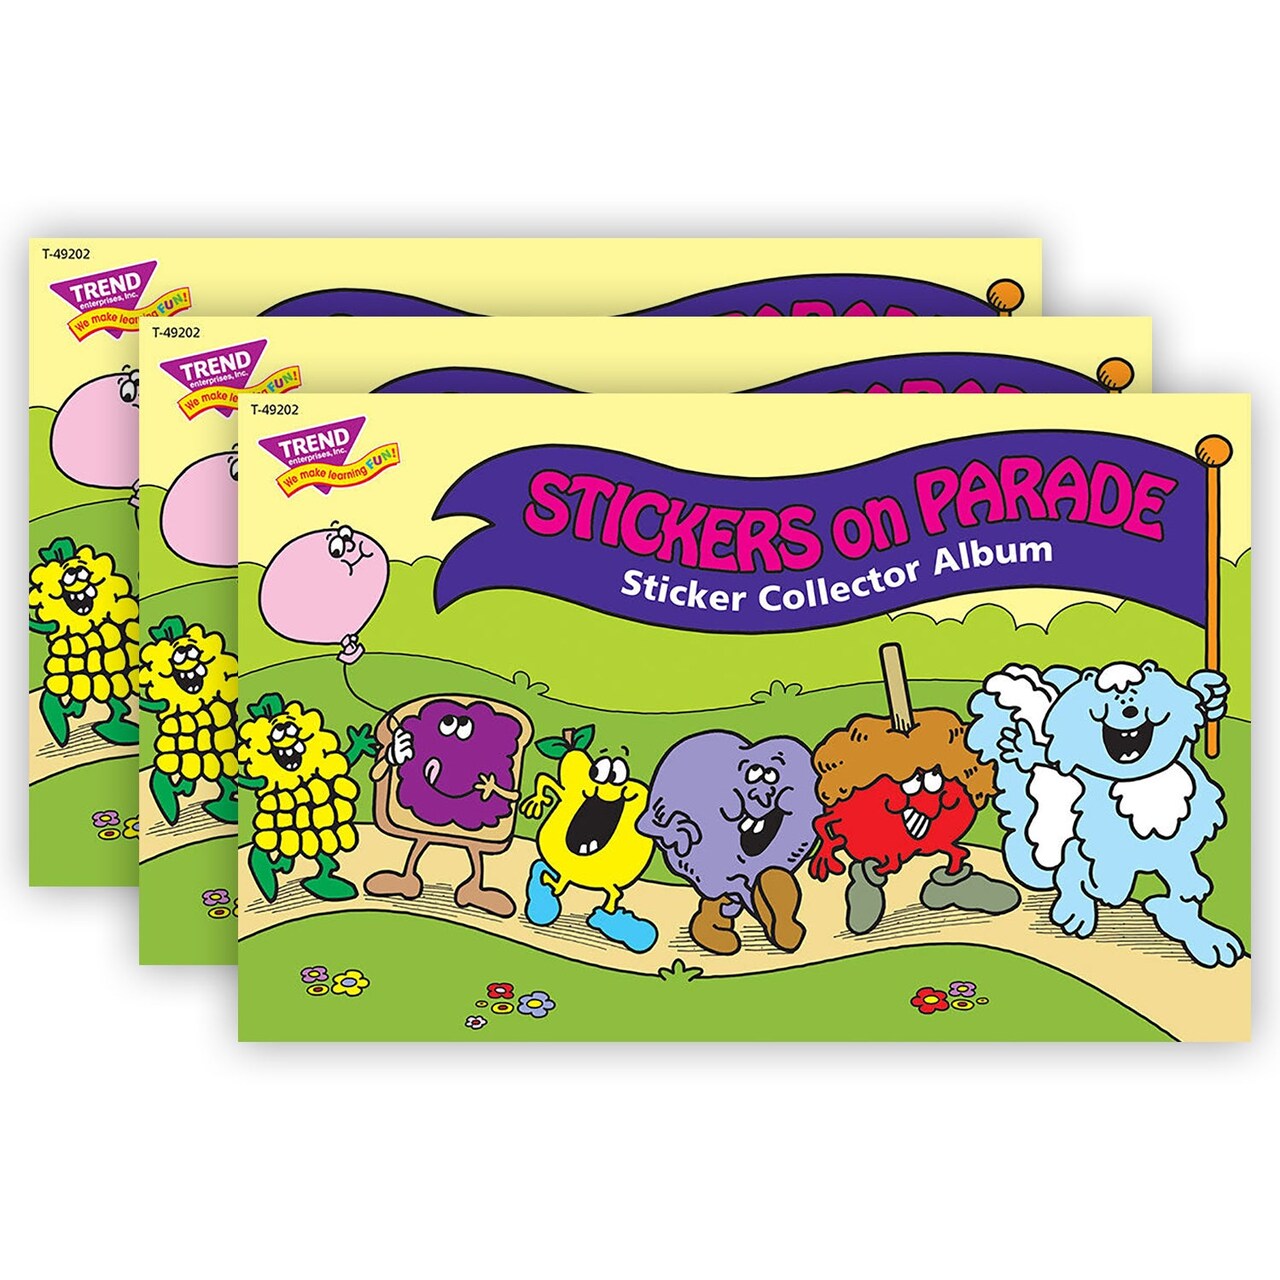 Stickers on Parade Sticker Collector Album, 16 Pages, 8.5 x 5.5, Pack of  3